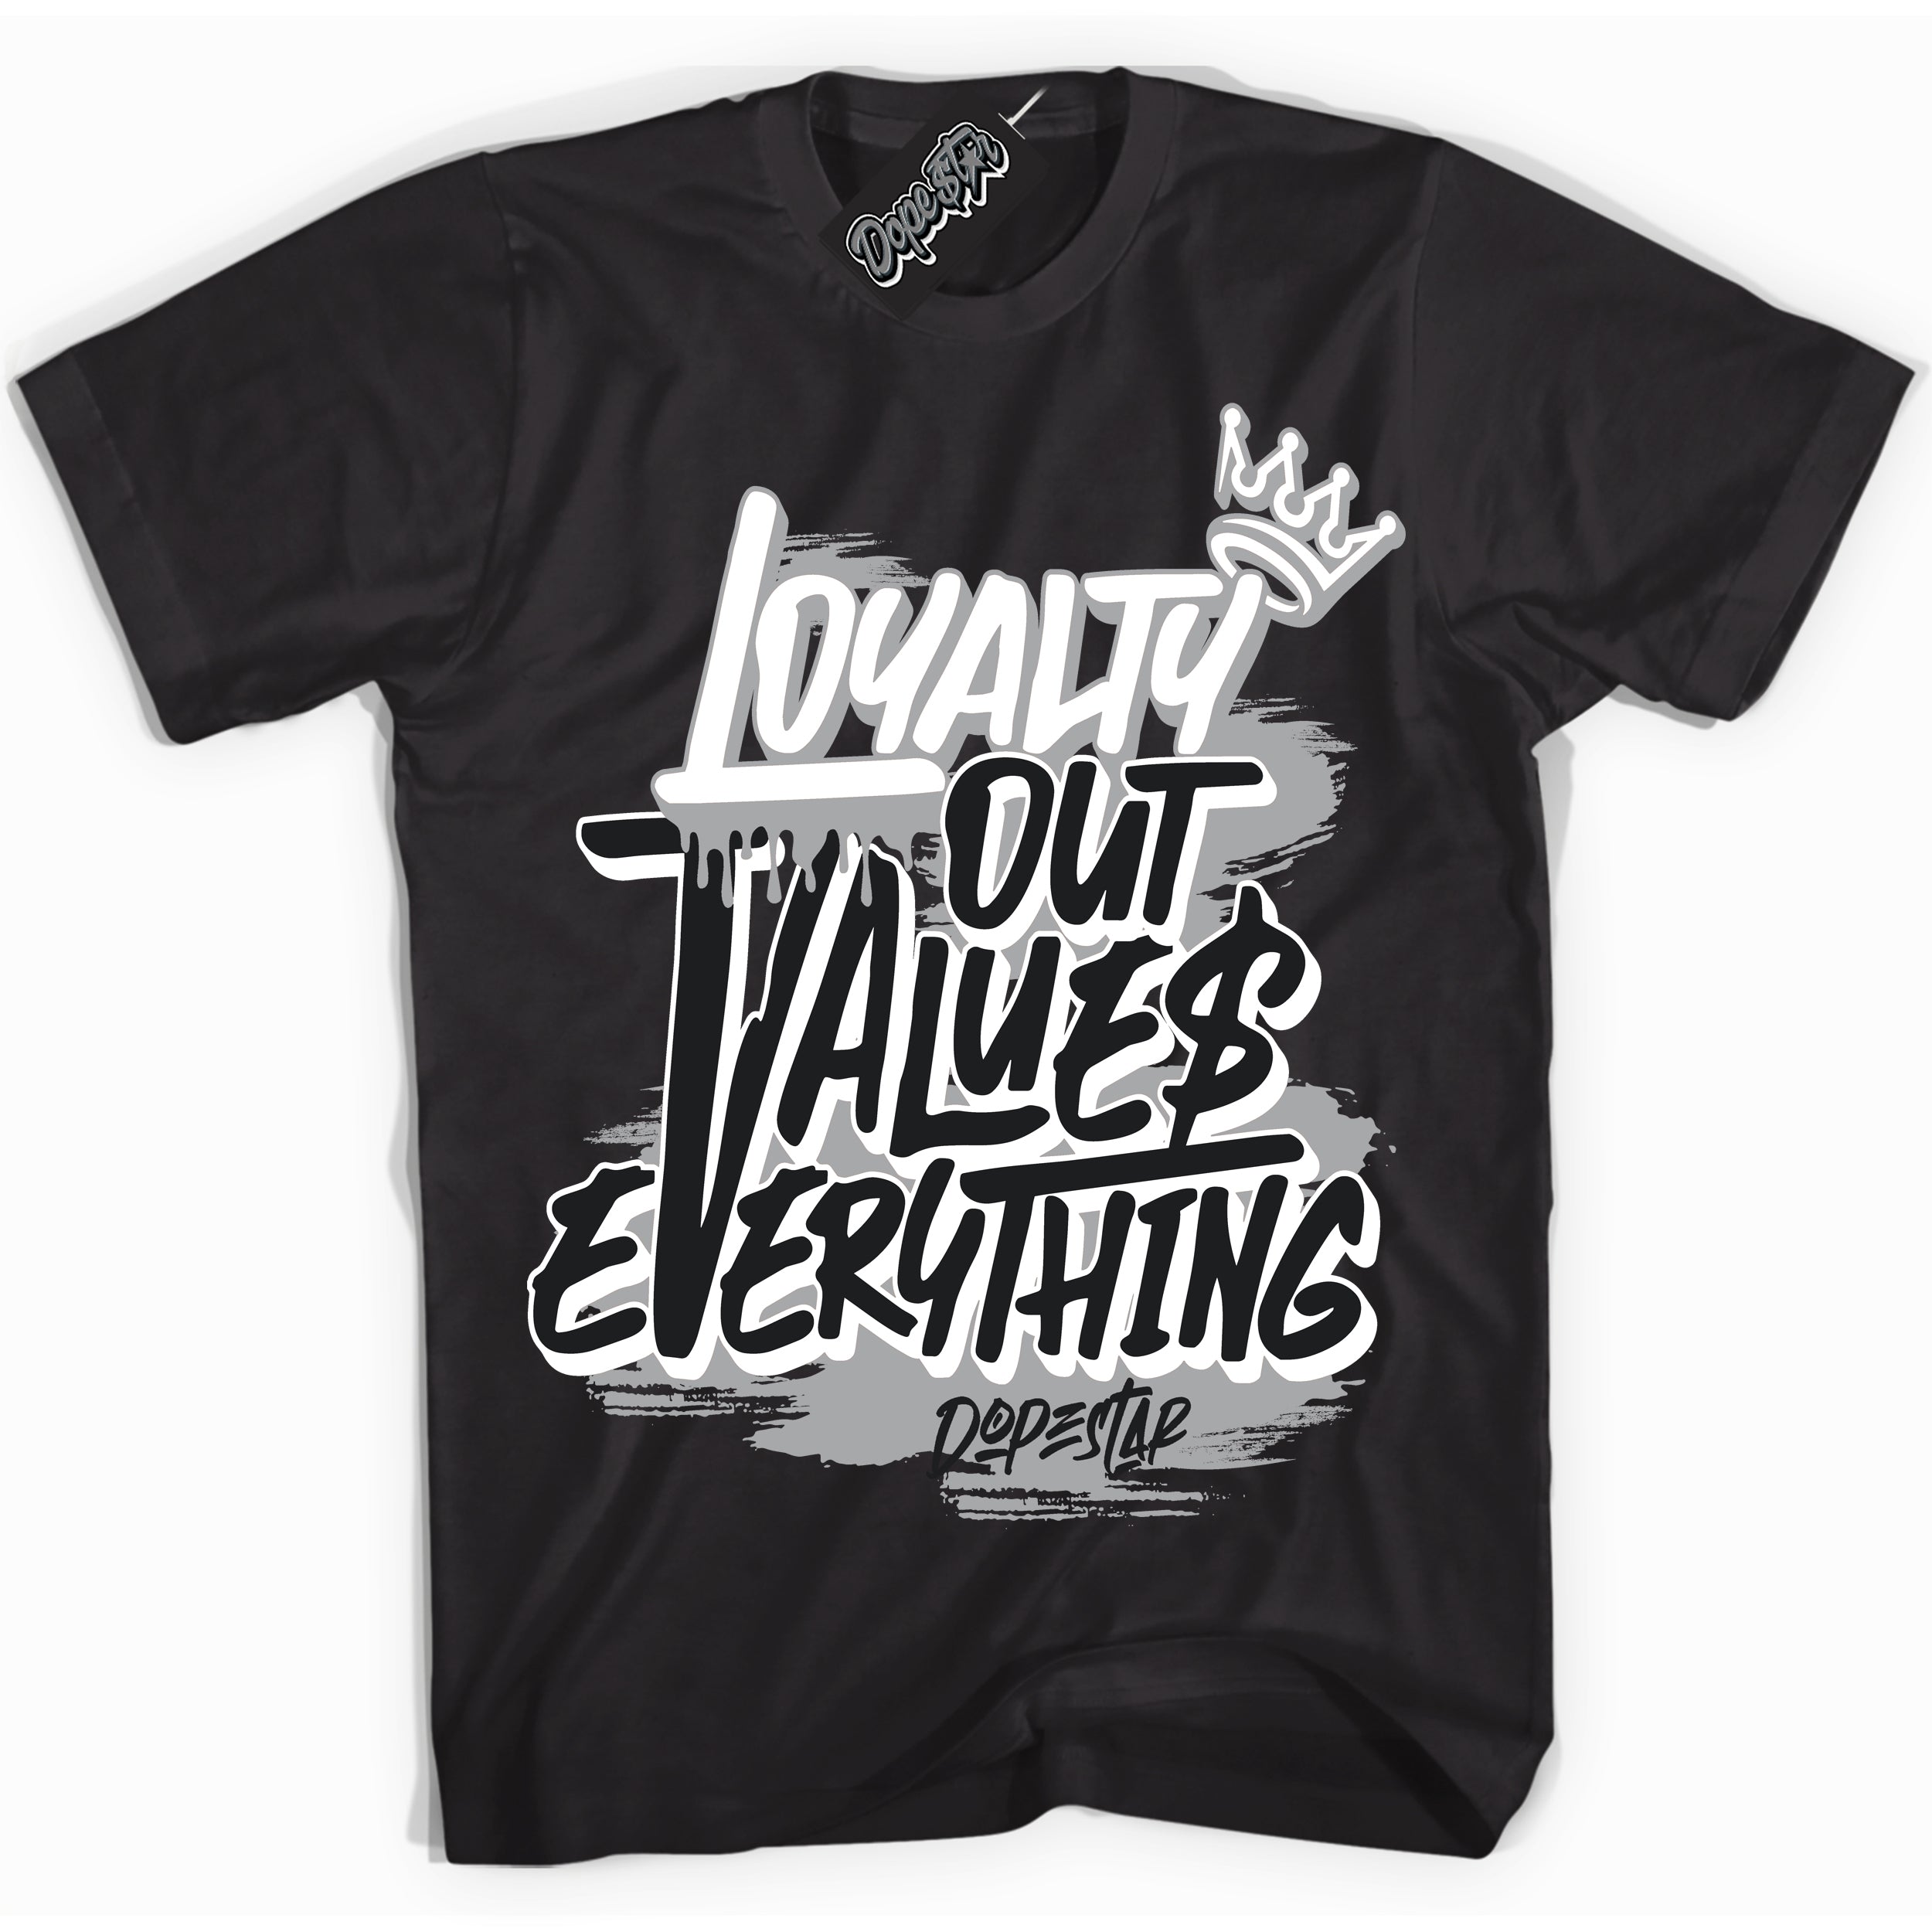 Cool Black Shirt with “ Loyalty Out Values Everything” design that perfectly matches Lottery Pack Grey Fog Sneakers.